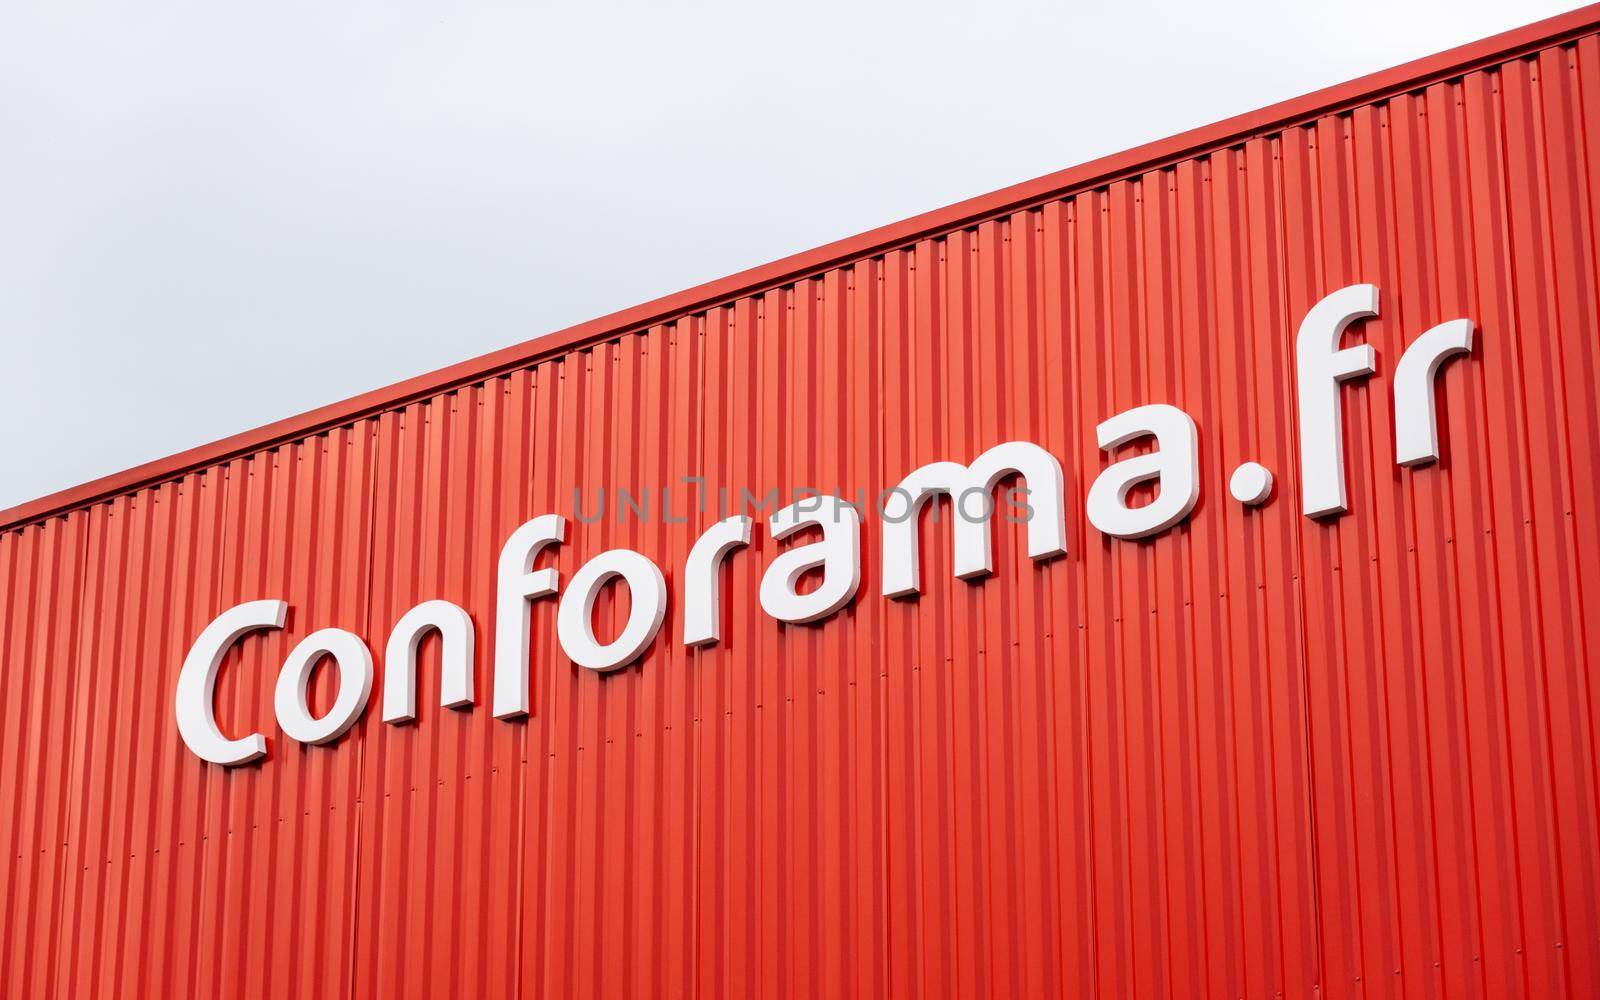 ANGLET, FRANCE - CIRCA FEBRUARY 2021: Conforama sign on red store facade. Conforama is a French home furnishings retail chain.